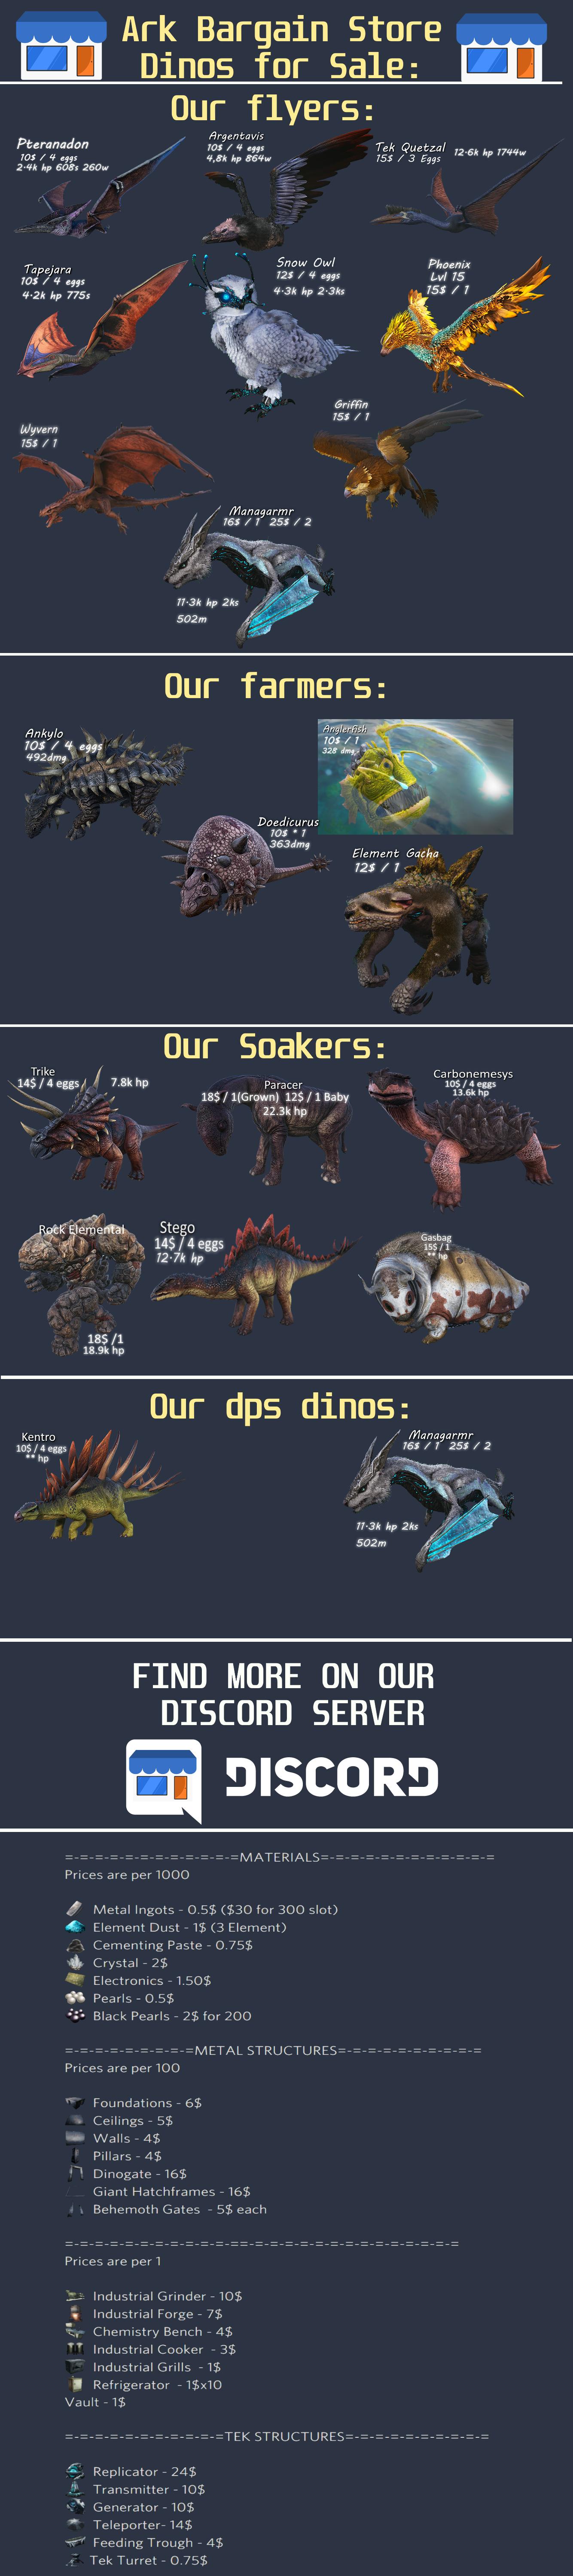 &#128293;&#12304;Ark Bargain Store&#12305;&#128293;&#12304;PC SMALLTRIBES&#12305;&#128293;&#12304;Best stats&#12305;&#128293;&#12304;Cheapest prices&#12305;&#128293;-dcmoare-jpg